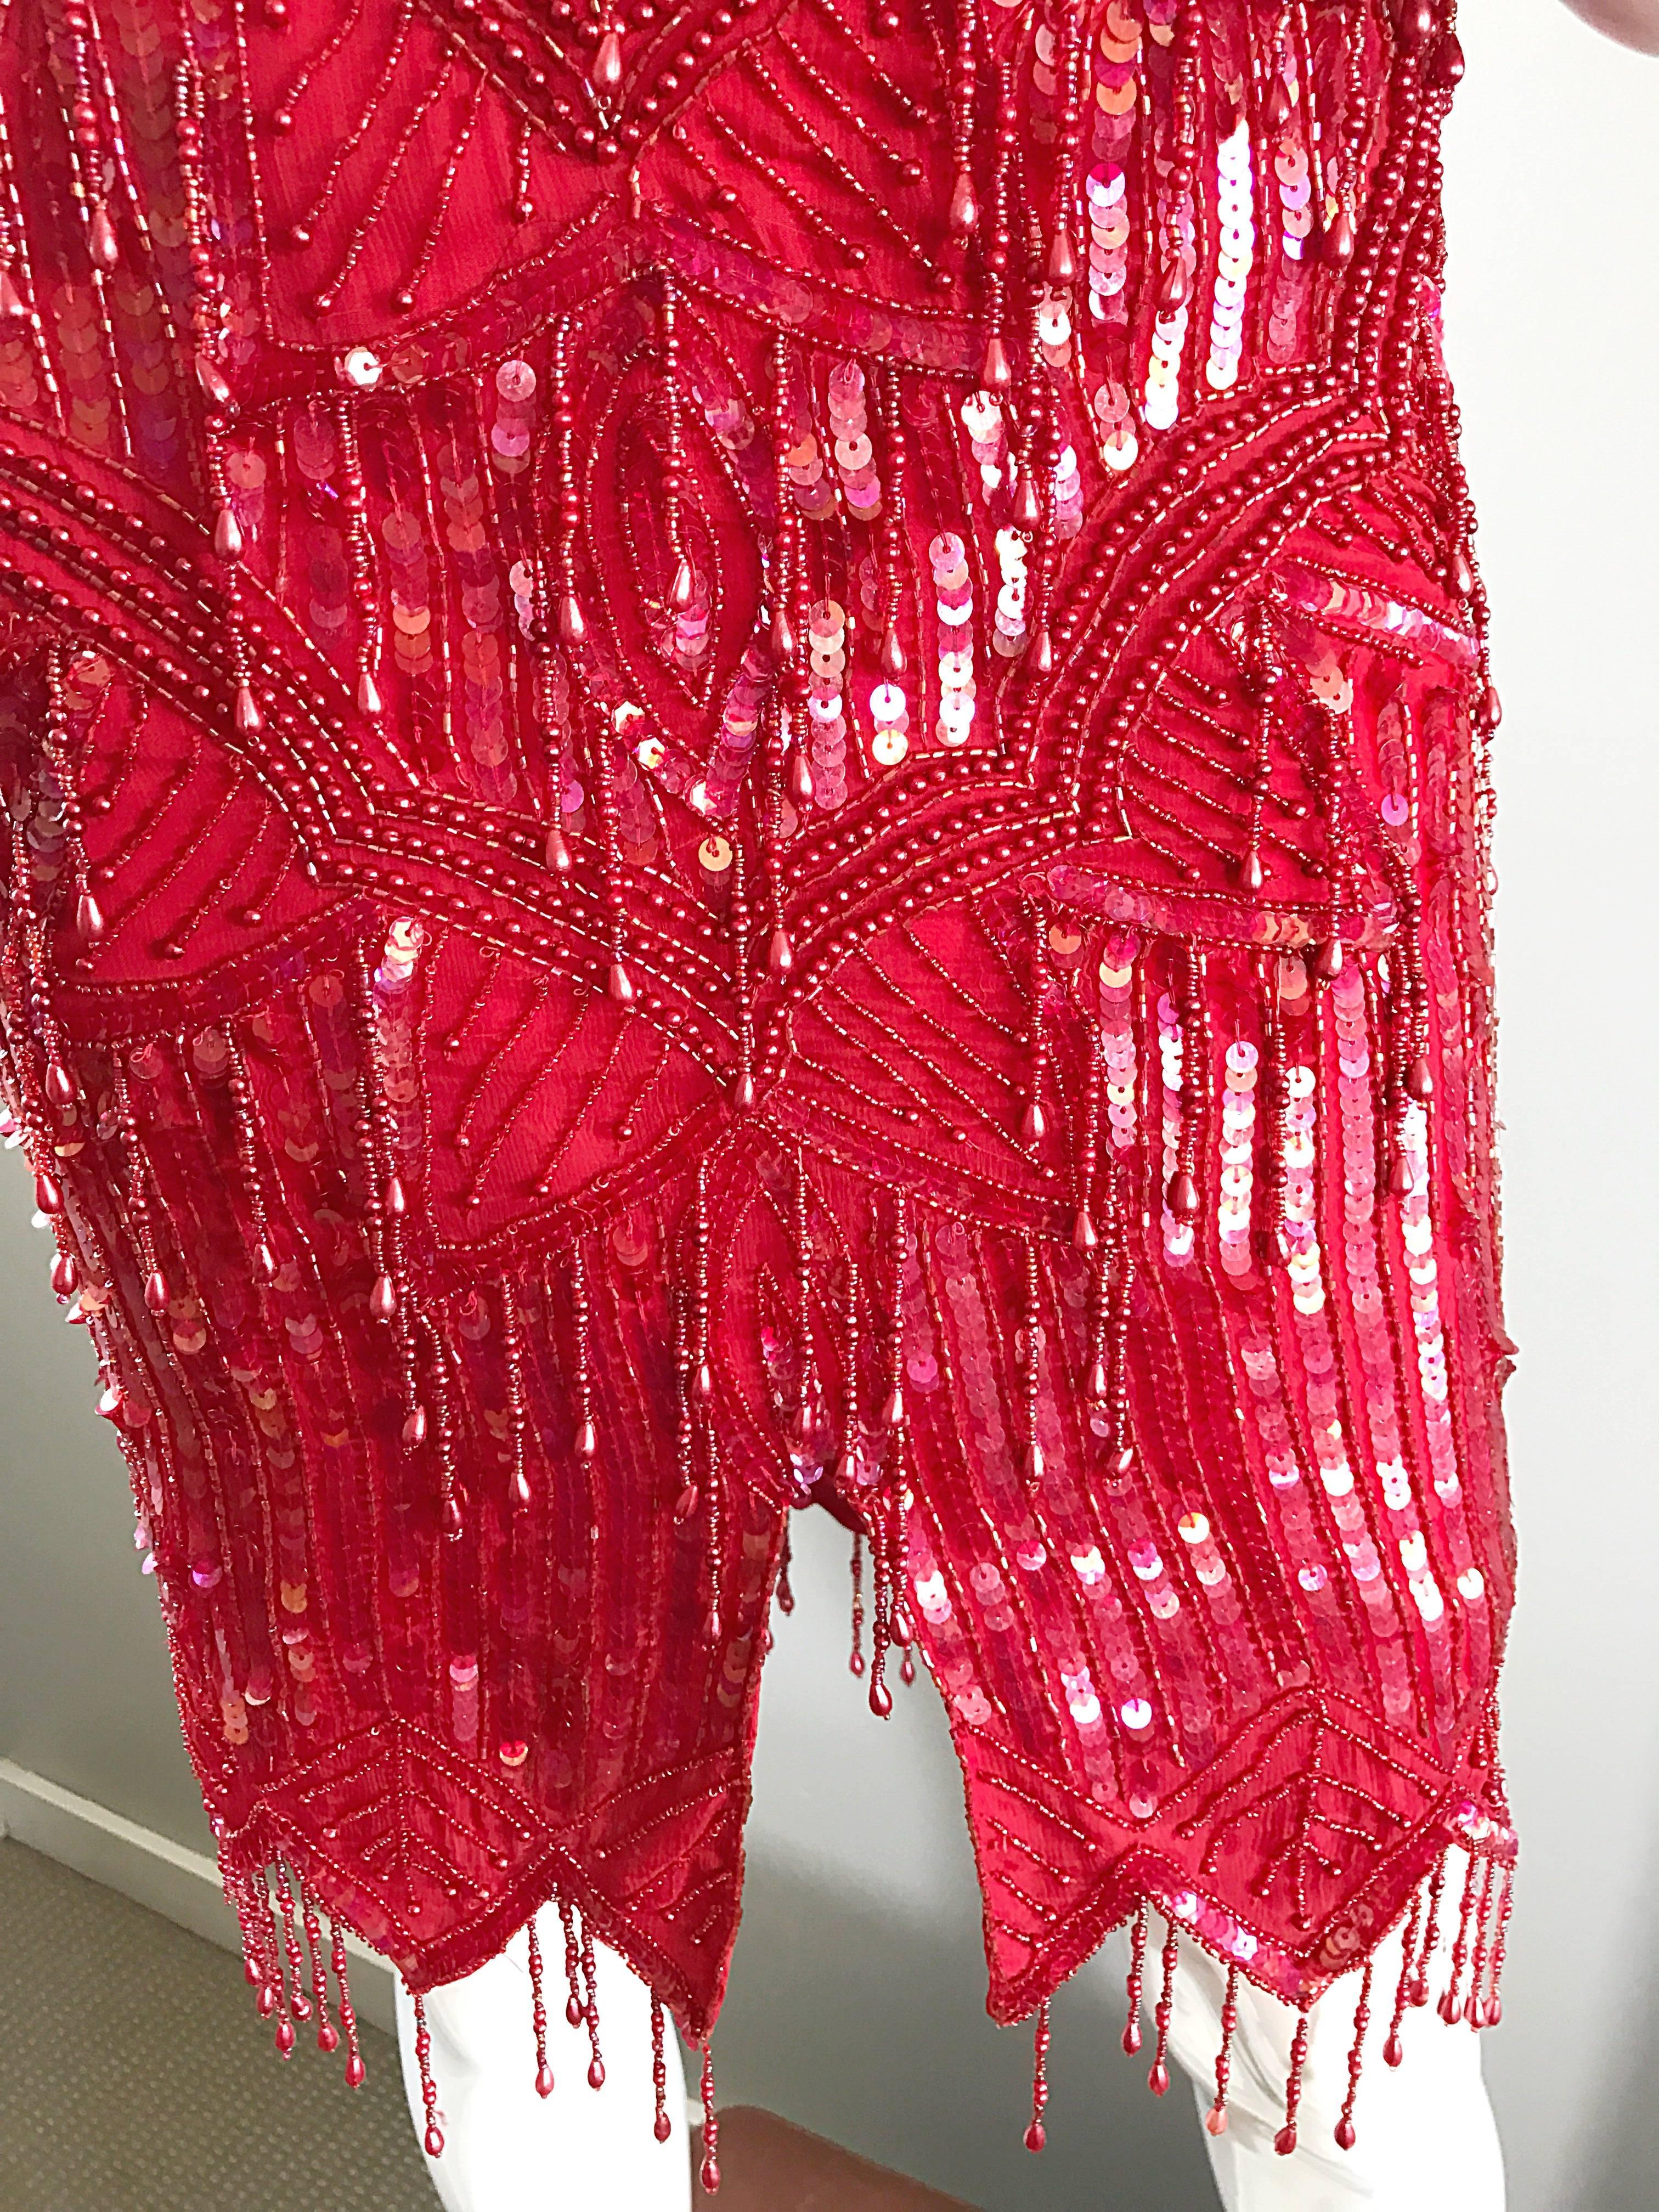 Women's Incredible Lipstick Red Silk Sequin Beaded Flapper Style Vintage Cocktail Dress